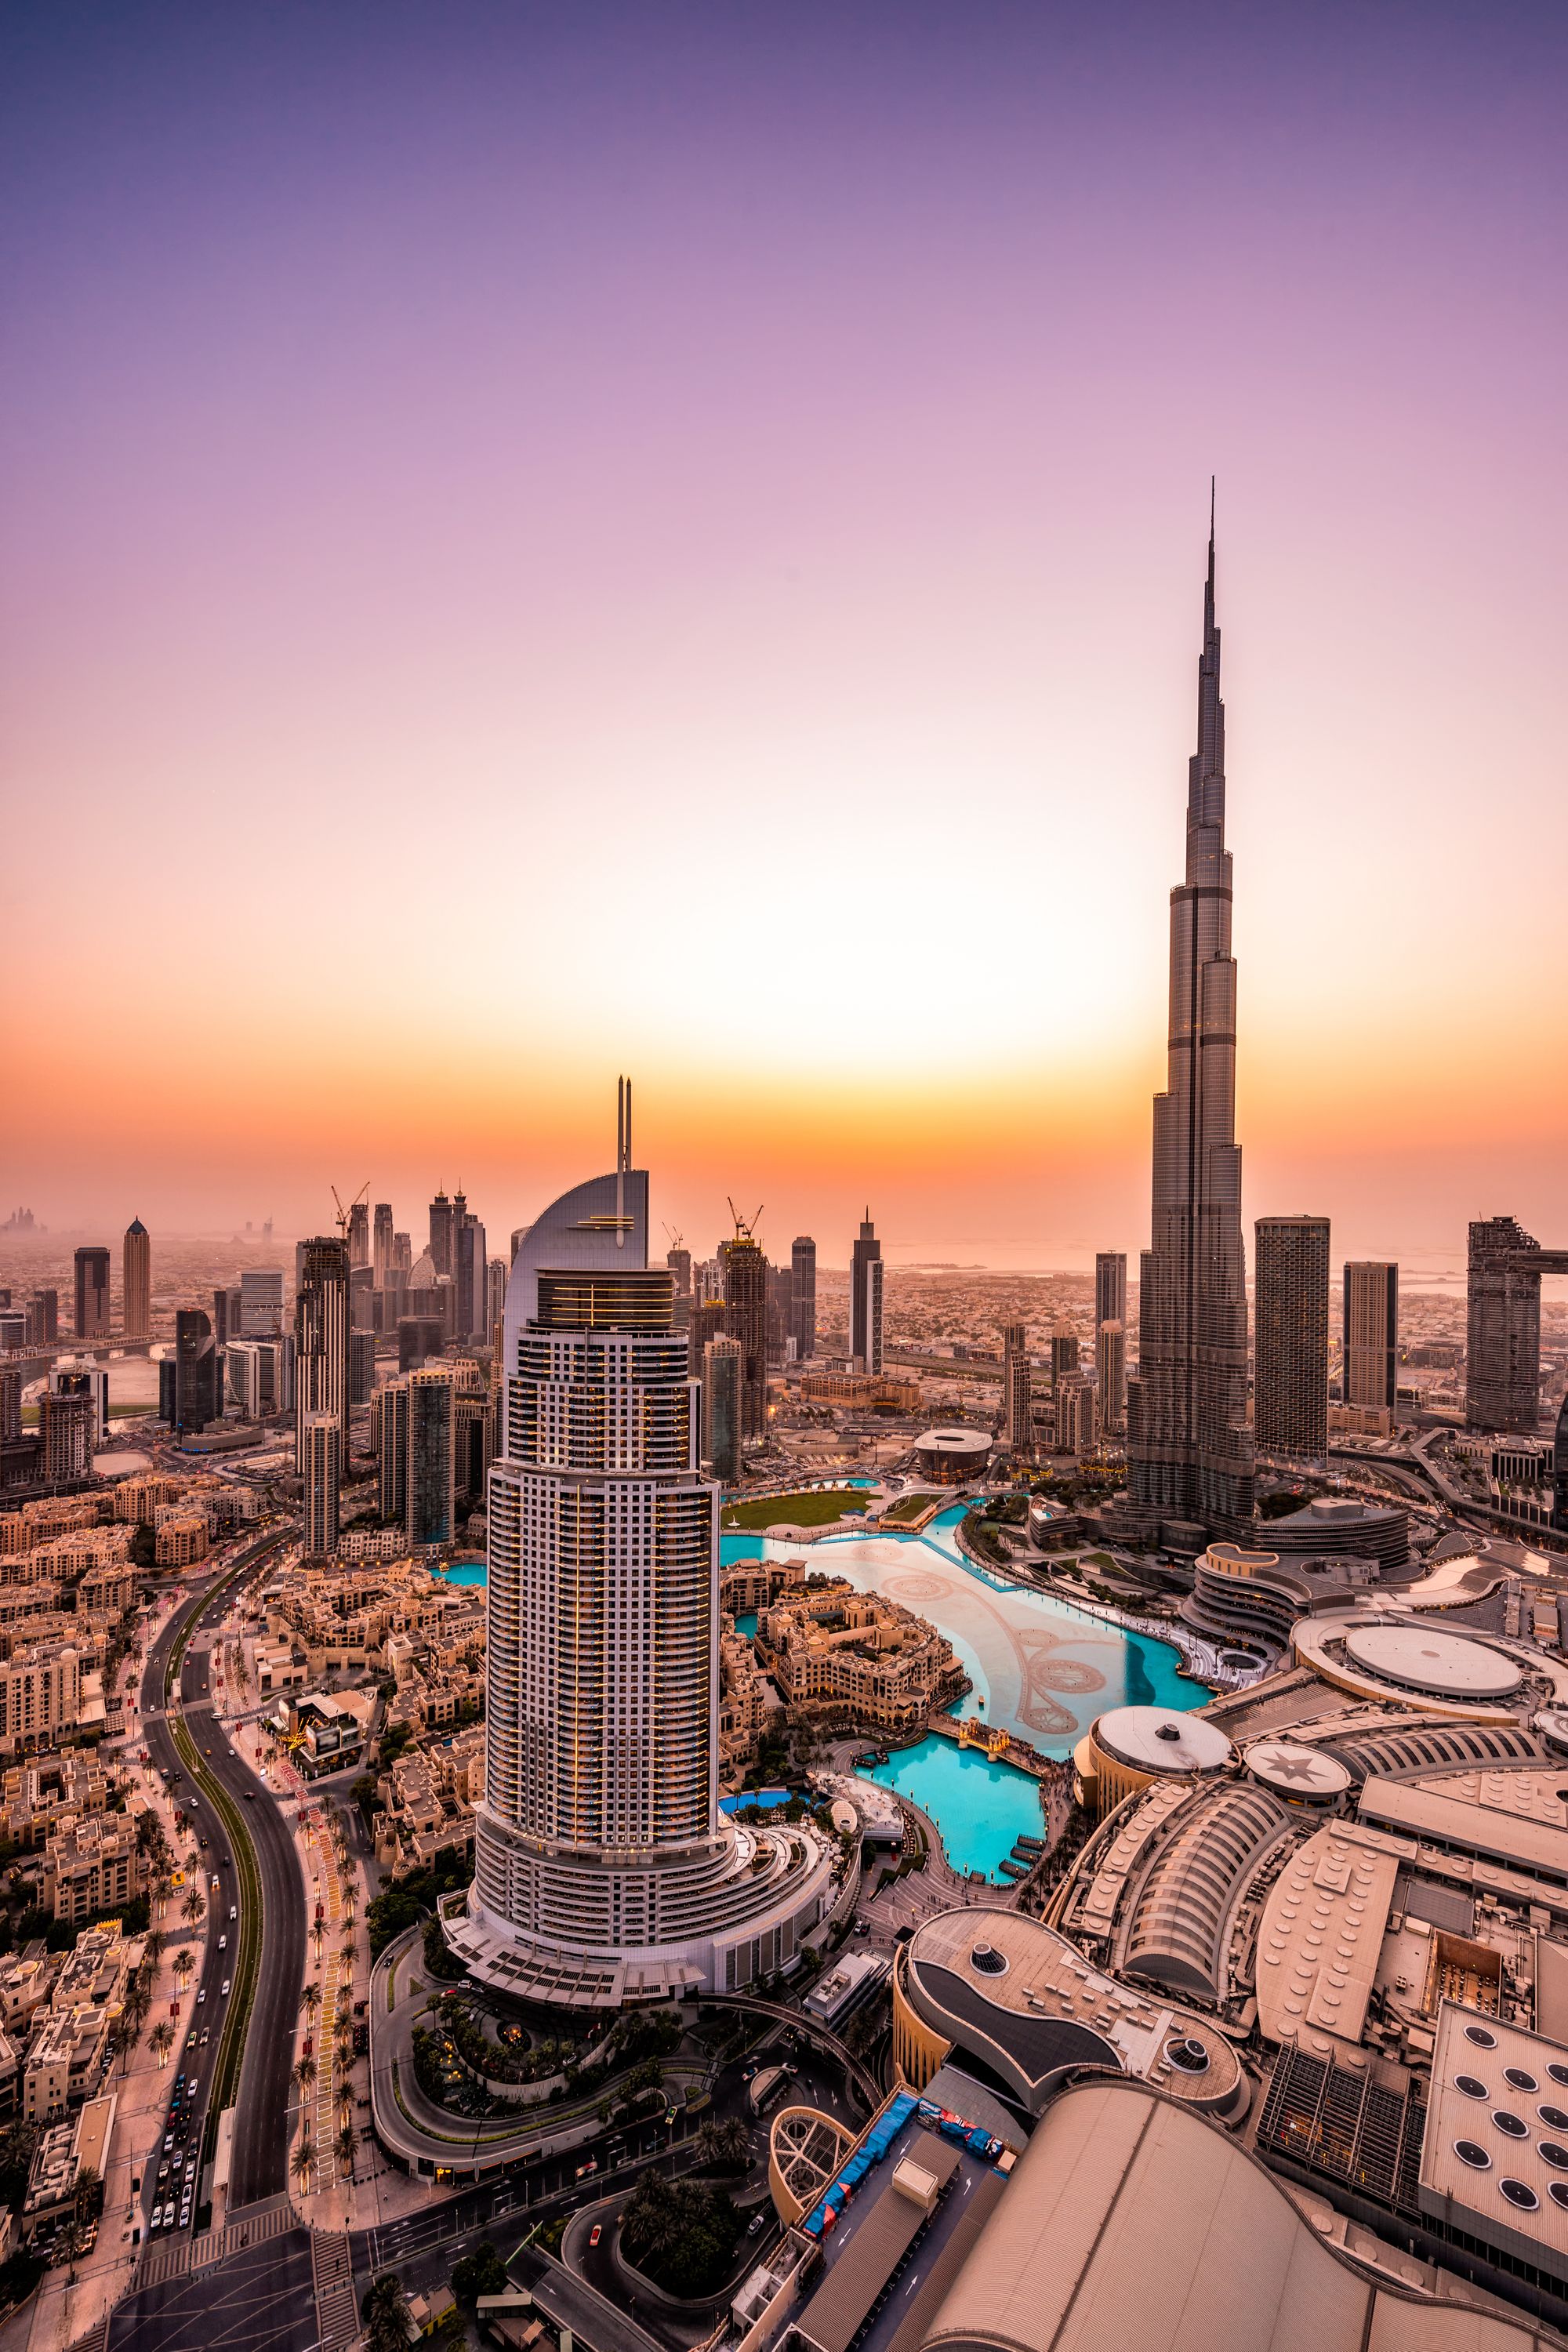 Downtown Dubai at sunset with the Burj Khalifa on the background